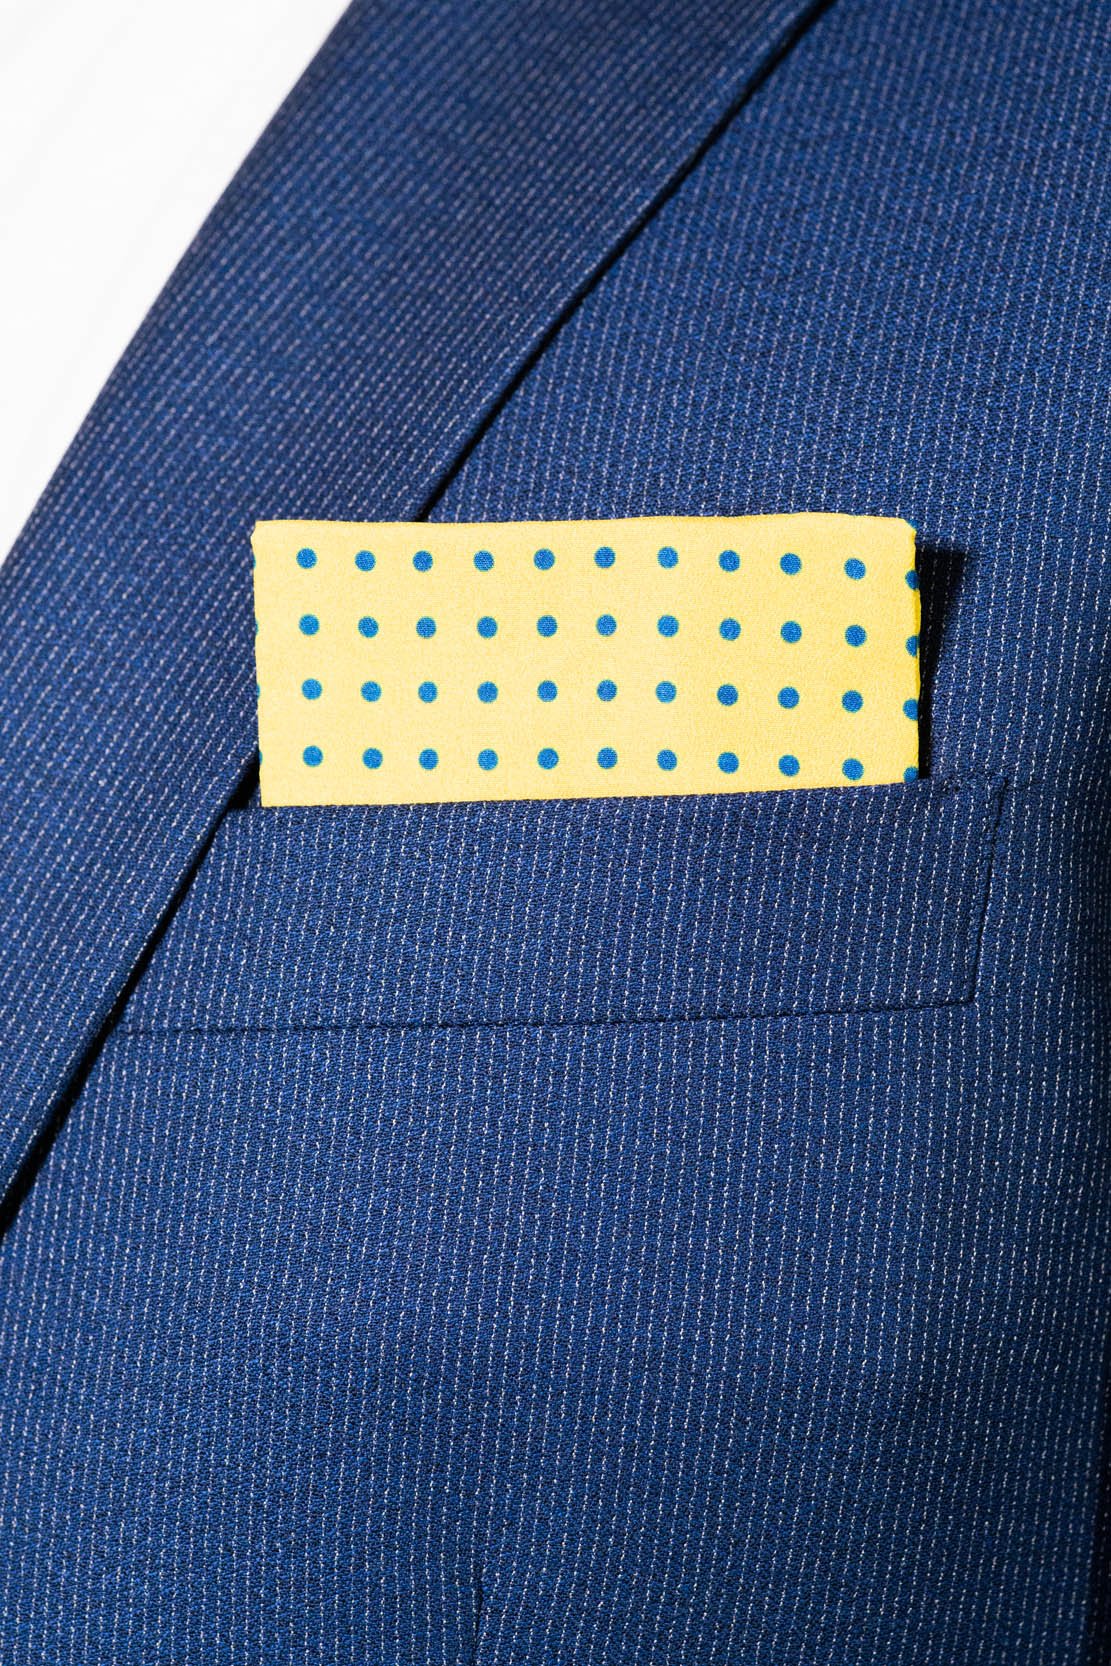 RARE CUT's Mustard Dots Pocket Square Worn in a Suit Jacket